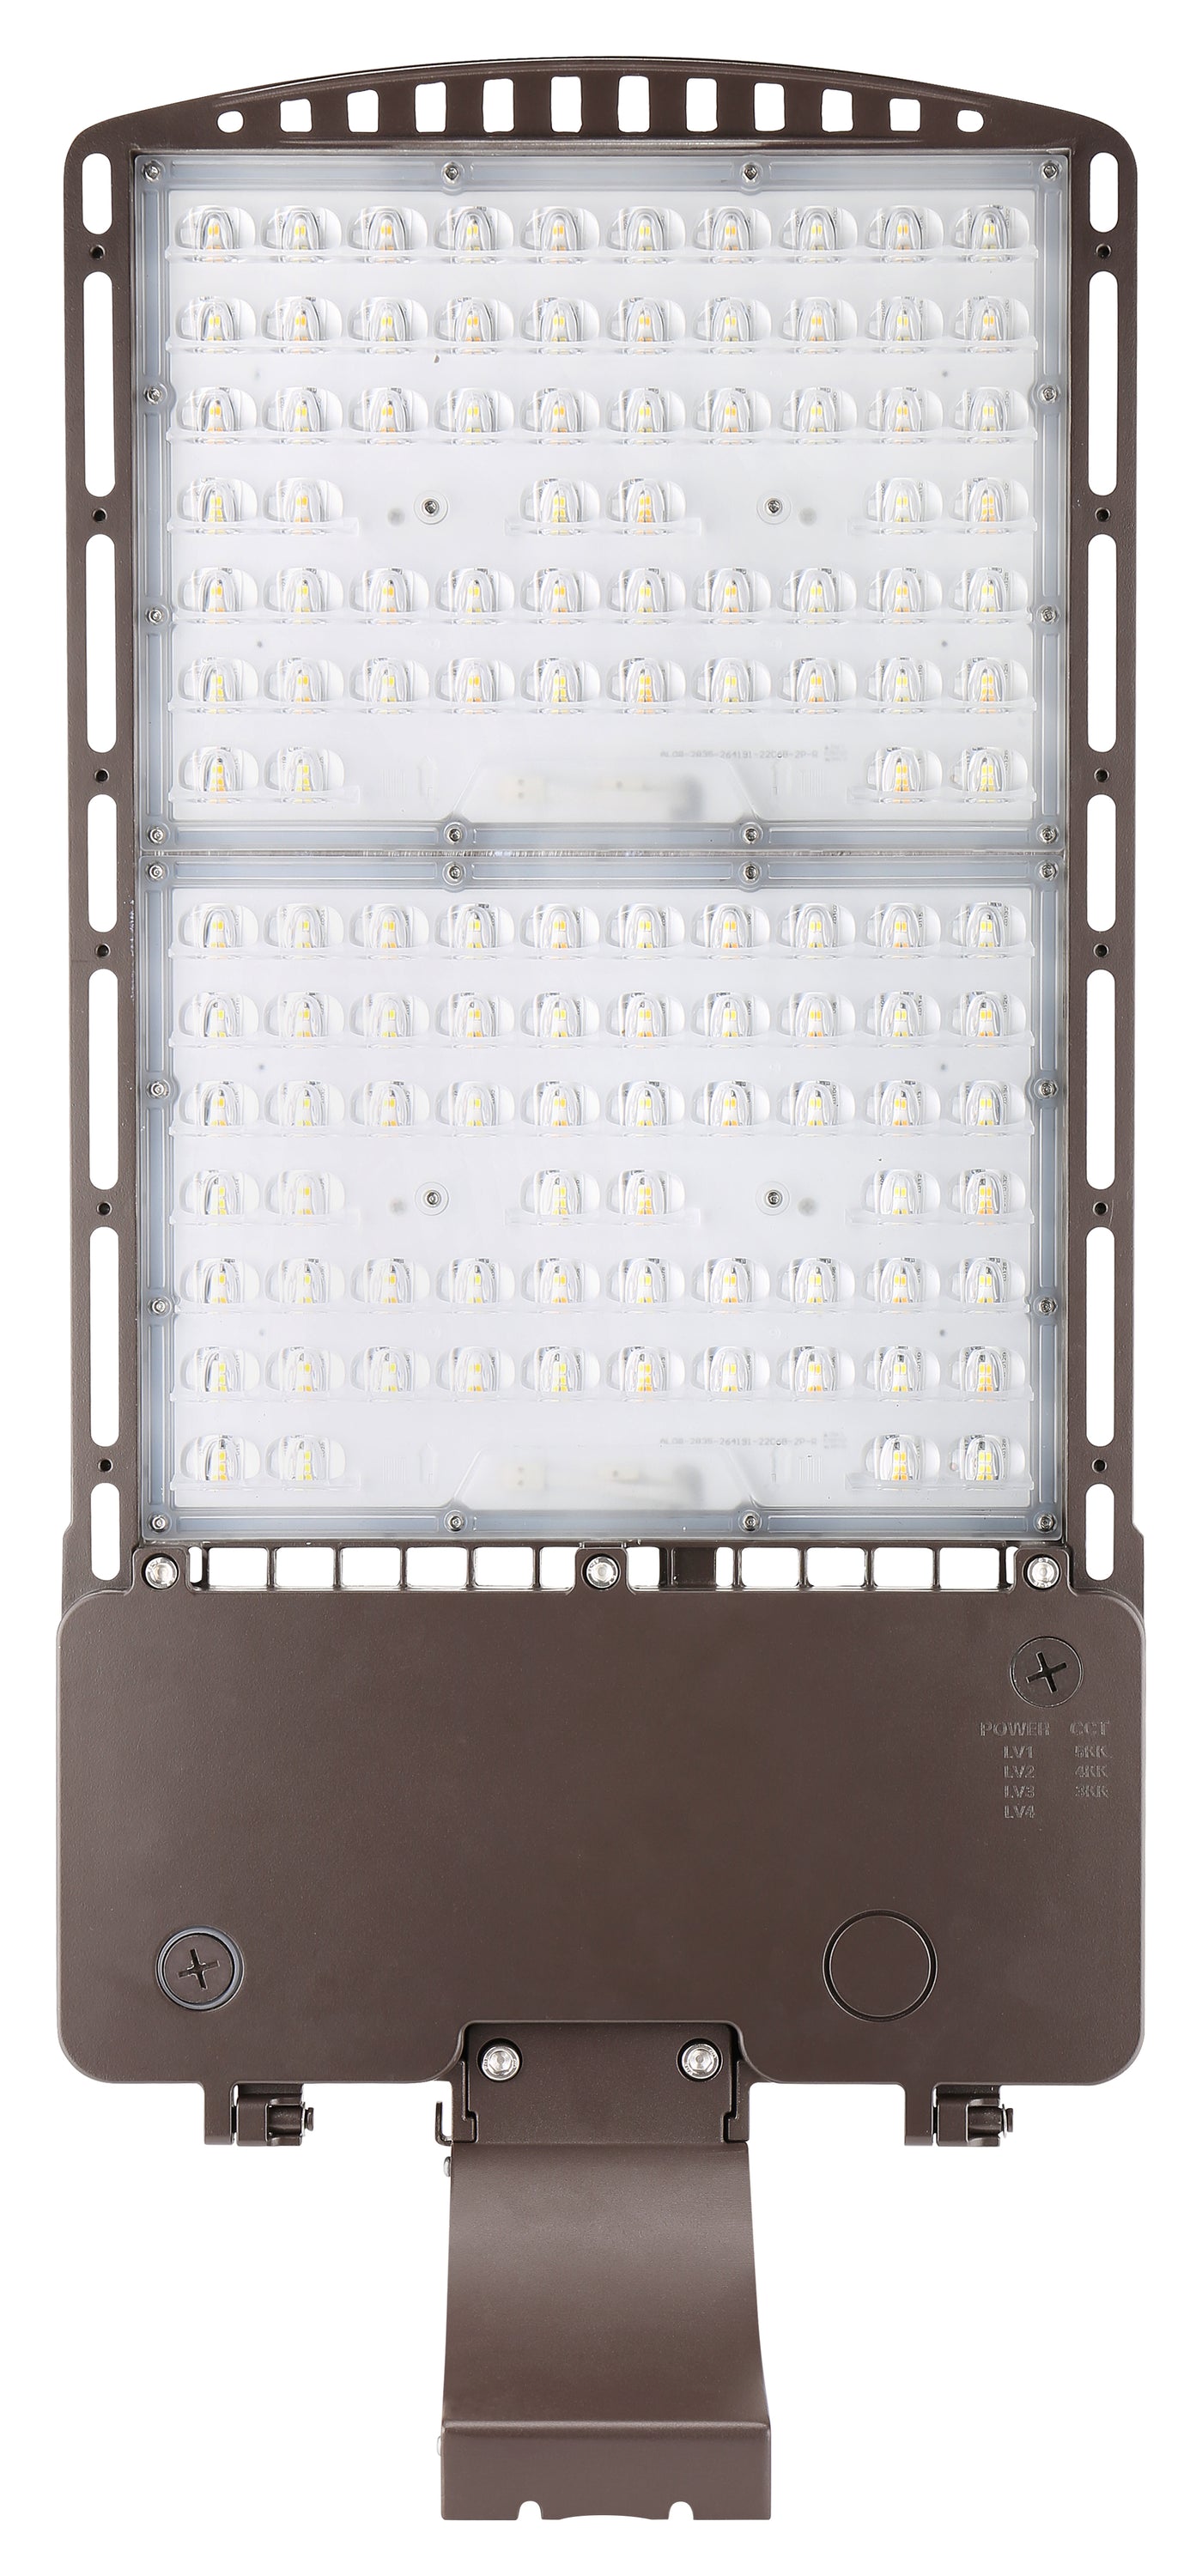 LED Area/Parking Lot Light, 45000 Lumen Max, Wattage and CCT Selectable, Type III, IV, or V Distribution, Photocell Included, 120-277V, Dark Bronze Finish